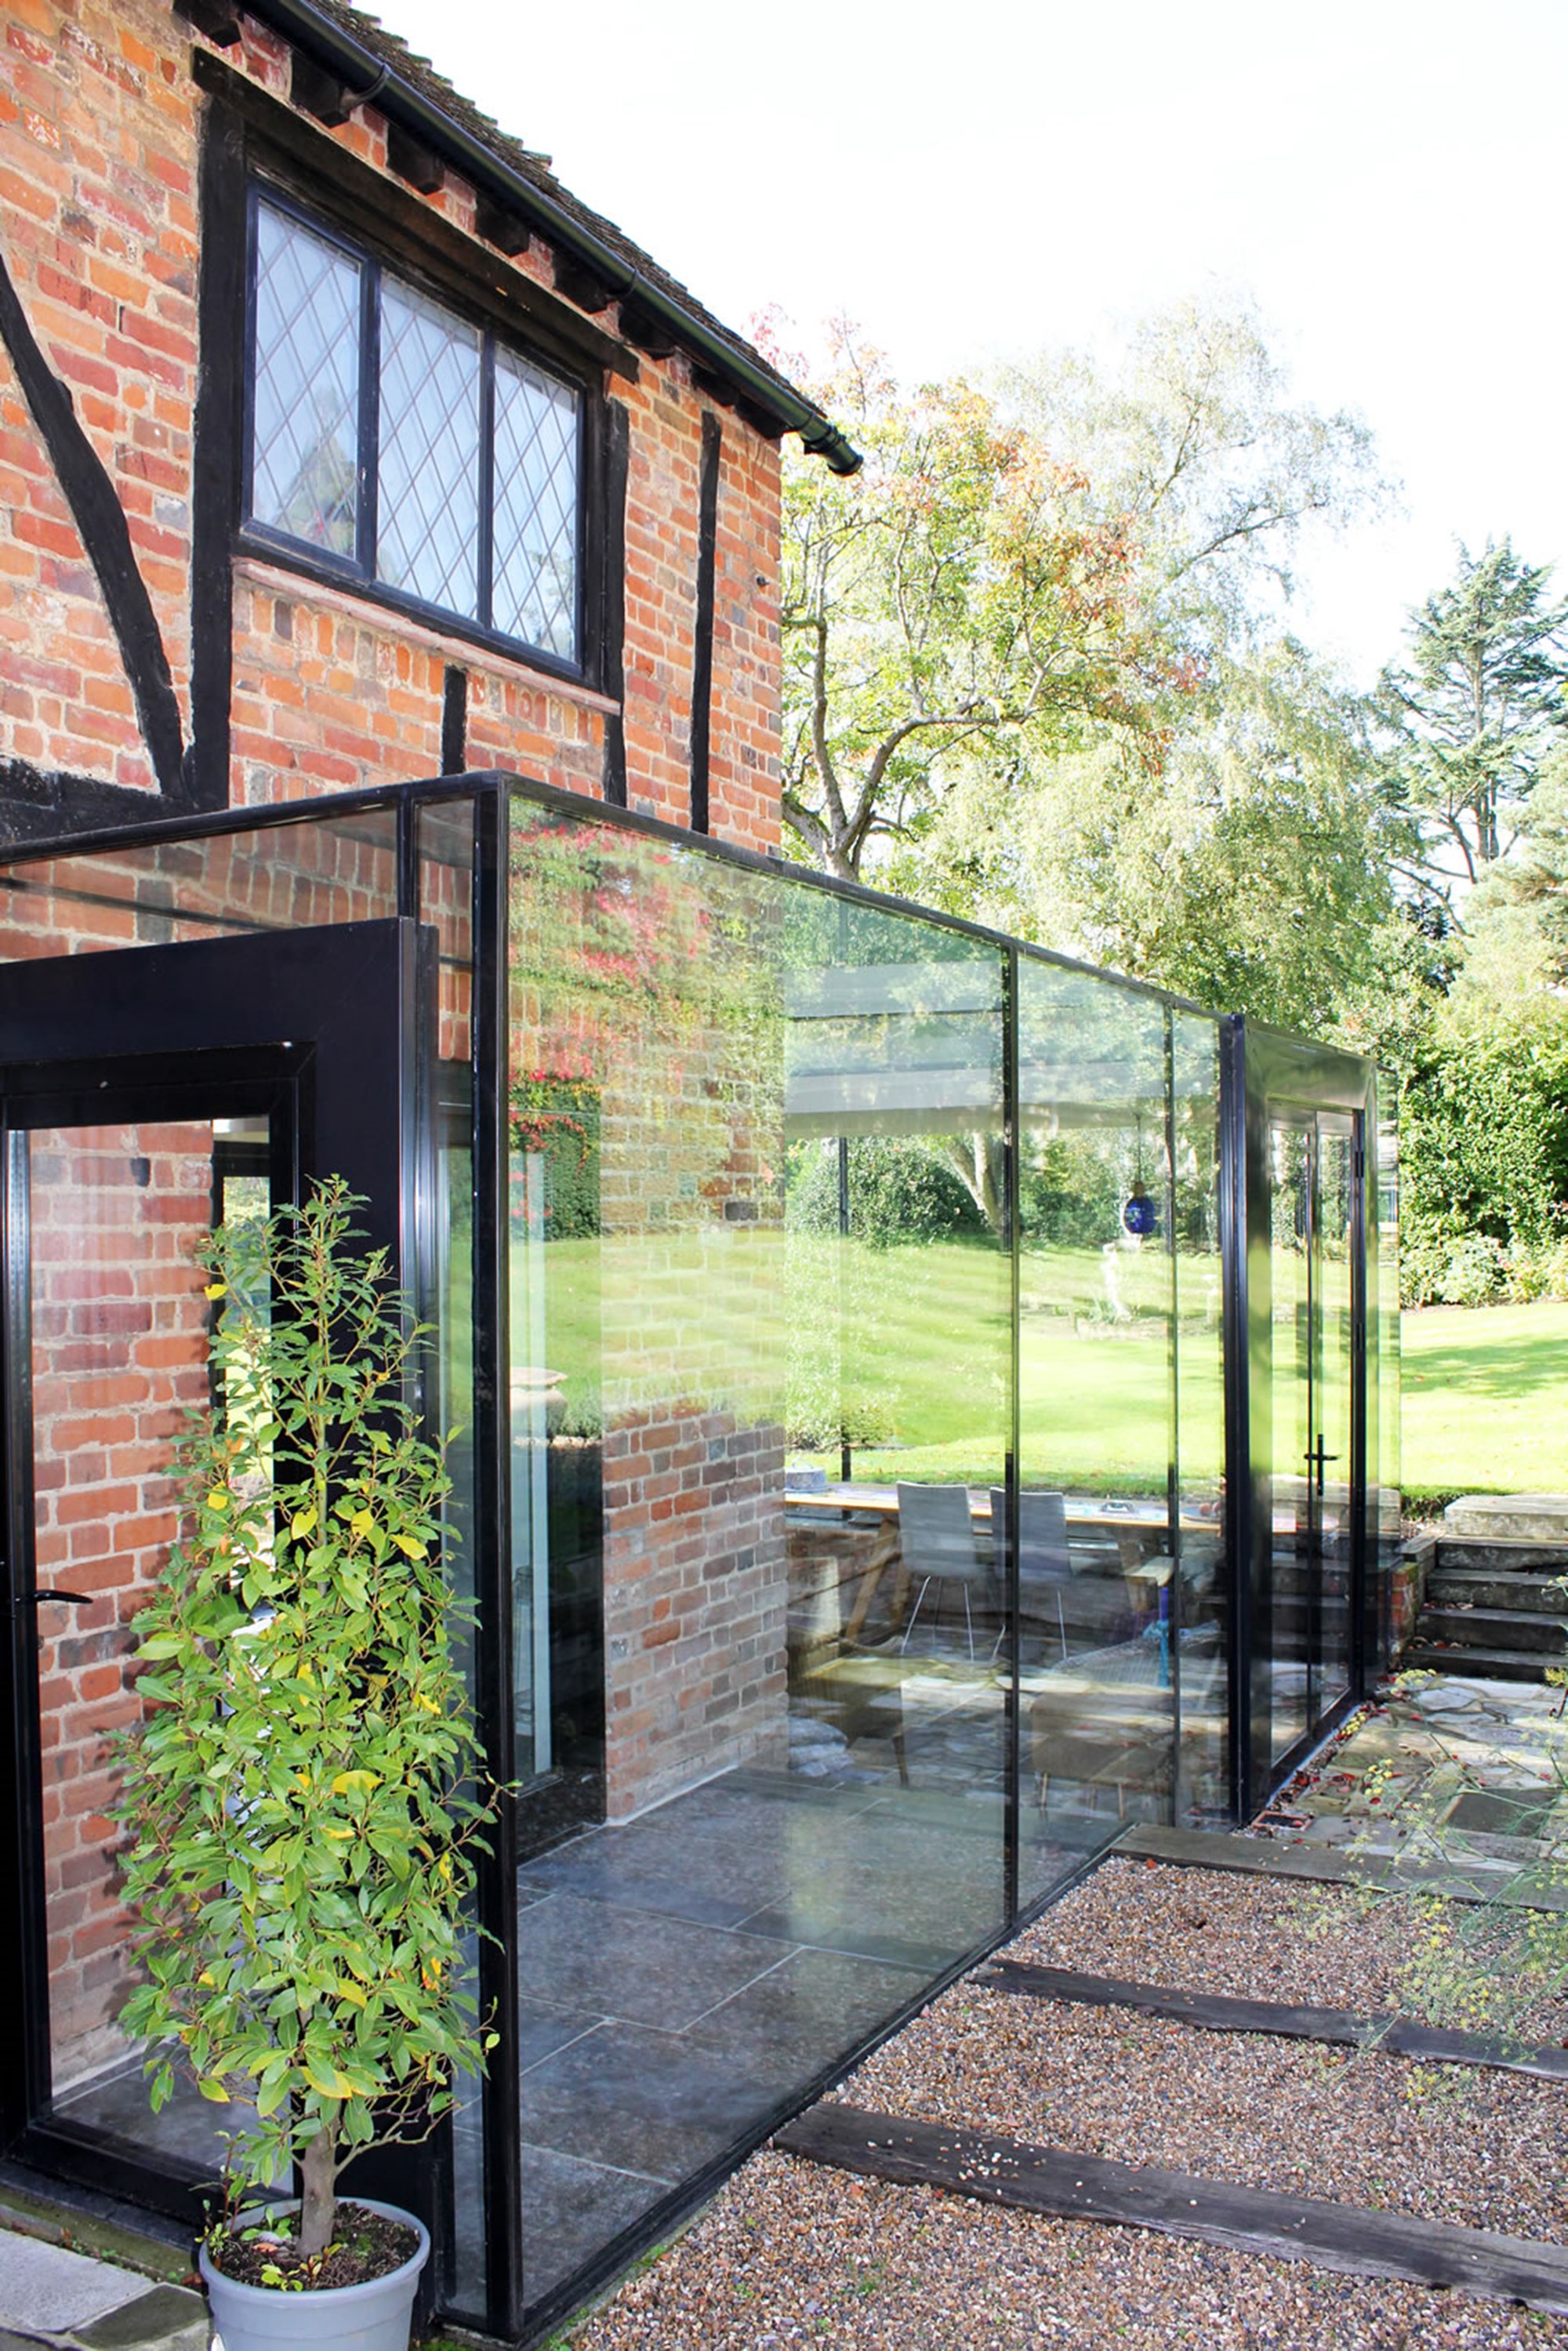 The Brick And Glass House